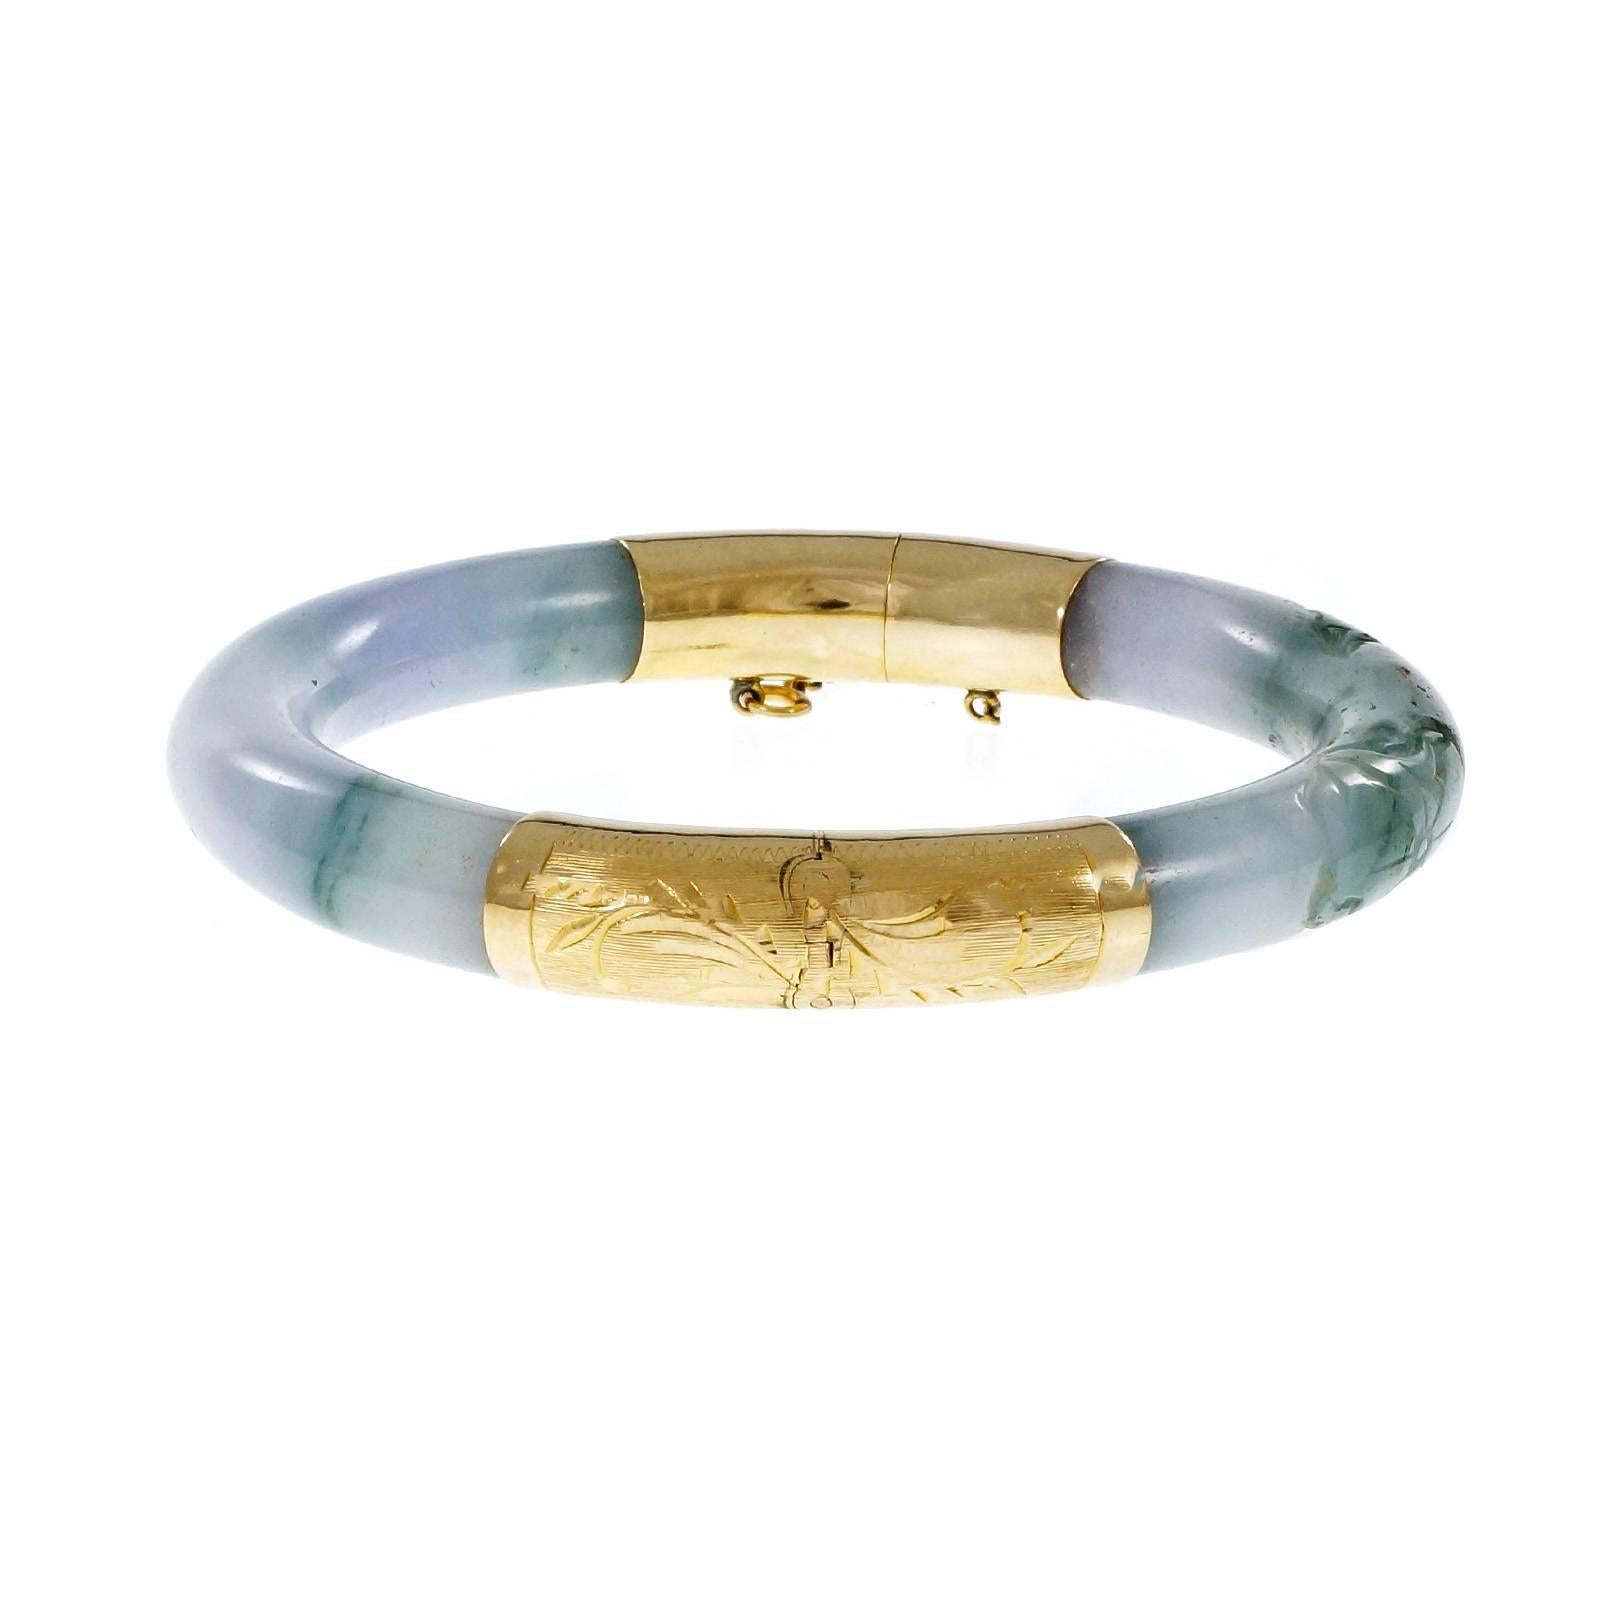 GIA certified natural Jadeite Jade hinged bangle bracelet with hand engraved hinge caps. Natural variegated purple and green Jadeite Jade. 

2 arc shaped natural purple and green Jadeite Jade, natural color and no enhancements, GIA certificate